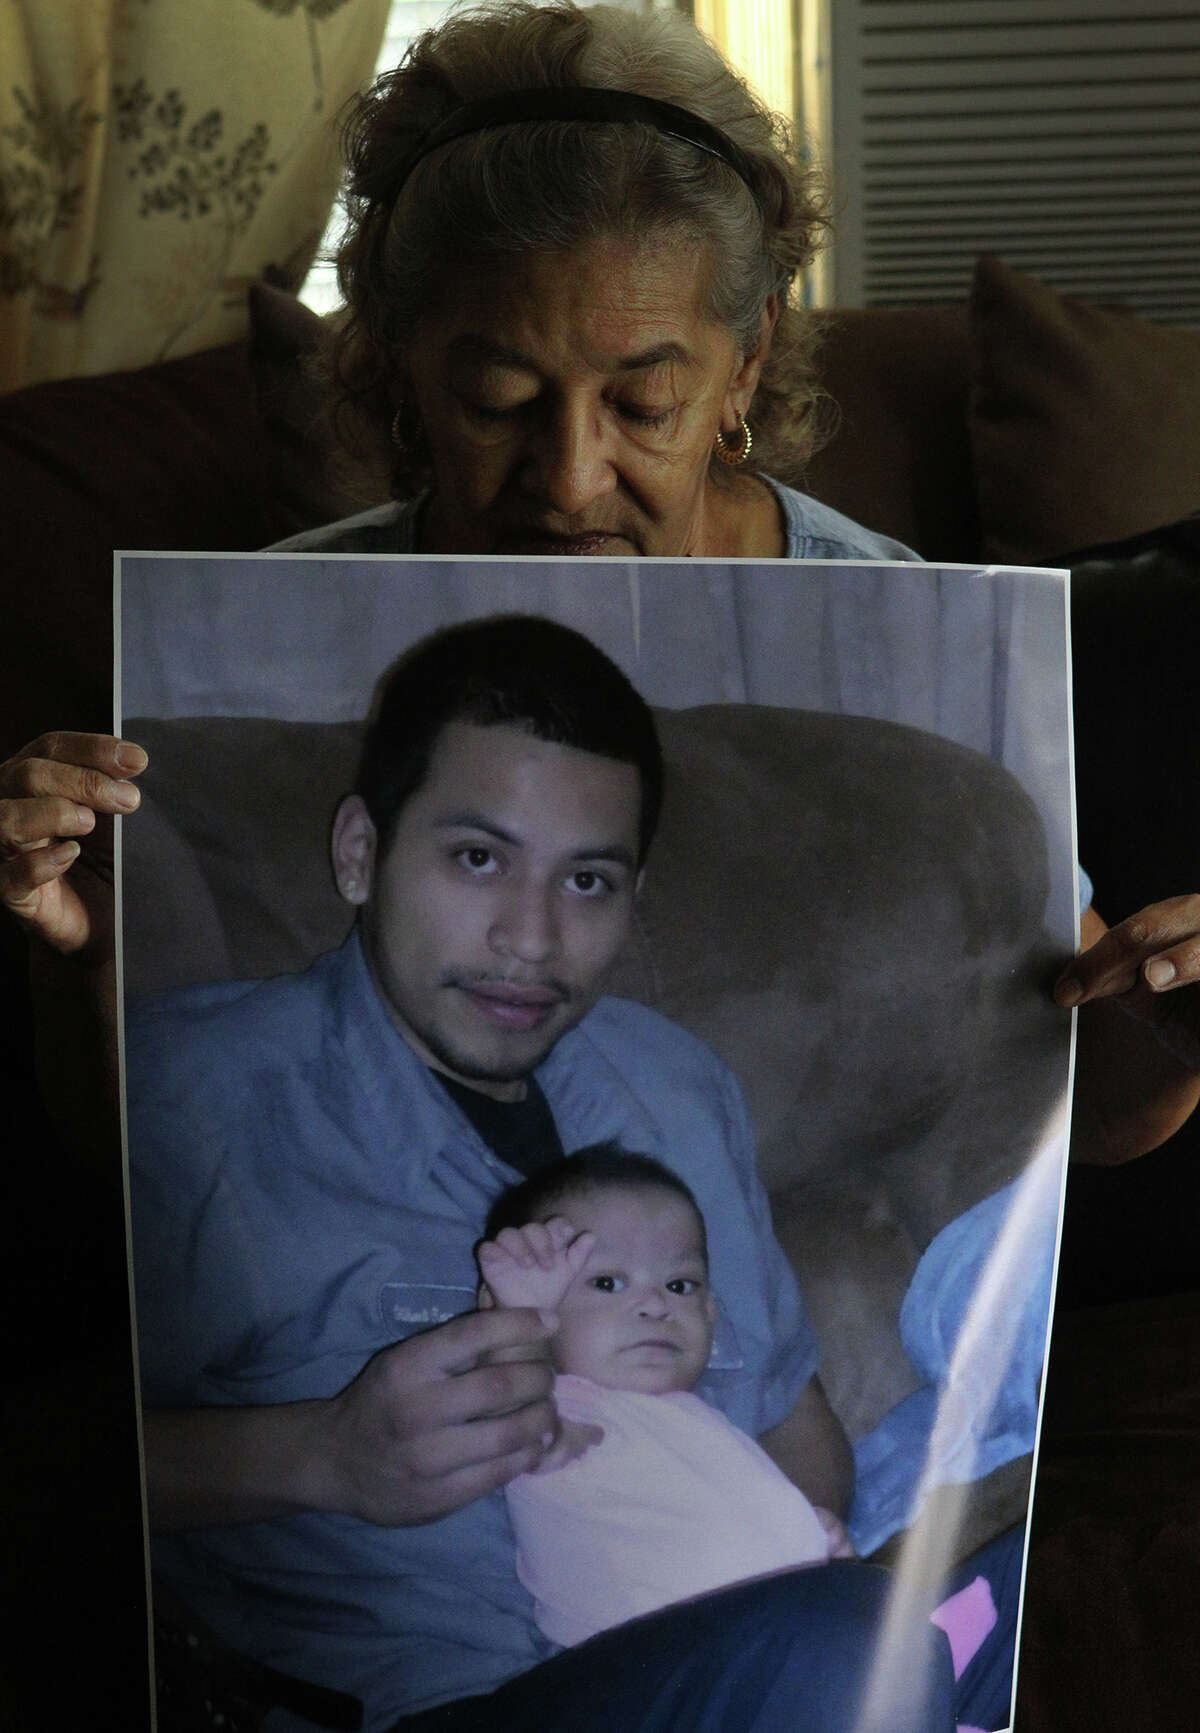 Stella Lopez holds a photograph Tuesday August 20, 2013 of her grandson Gilbert Ramos,25. Ramos was killed last Saturday night at the intersection of of Wallace street and General McMullen when a man fleeing from a different accident struck and killed Ramos. Jose Hernandez,56, has been charged with intoxication manslaughter after allegedly striking Ramos while Ramos was crossing the street. Hernandez has been convicted of driving while intoxicated four times since 1984. The little girl being held by Ramos is his daughter Azeriyah Huichan,1.